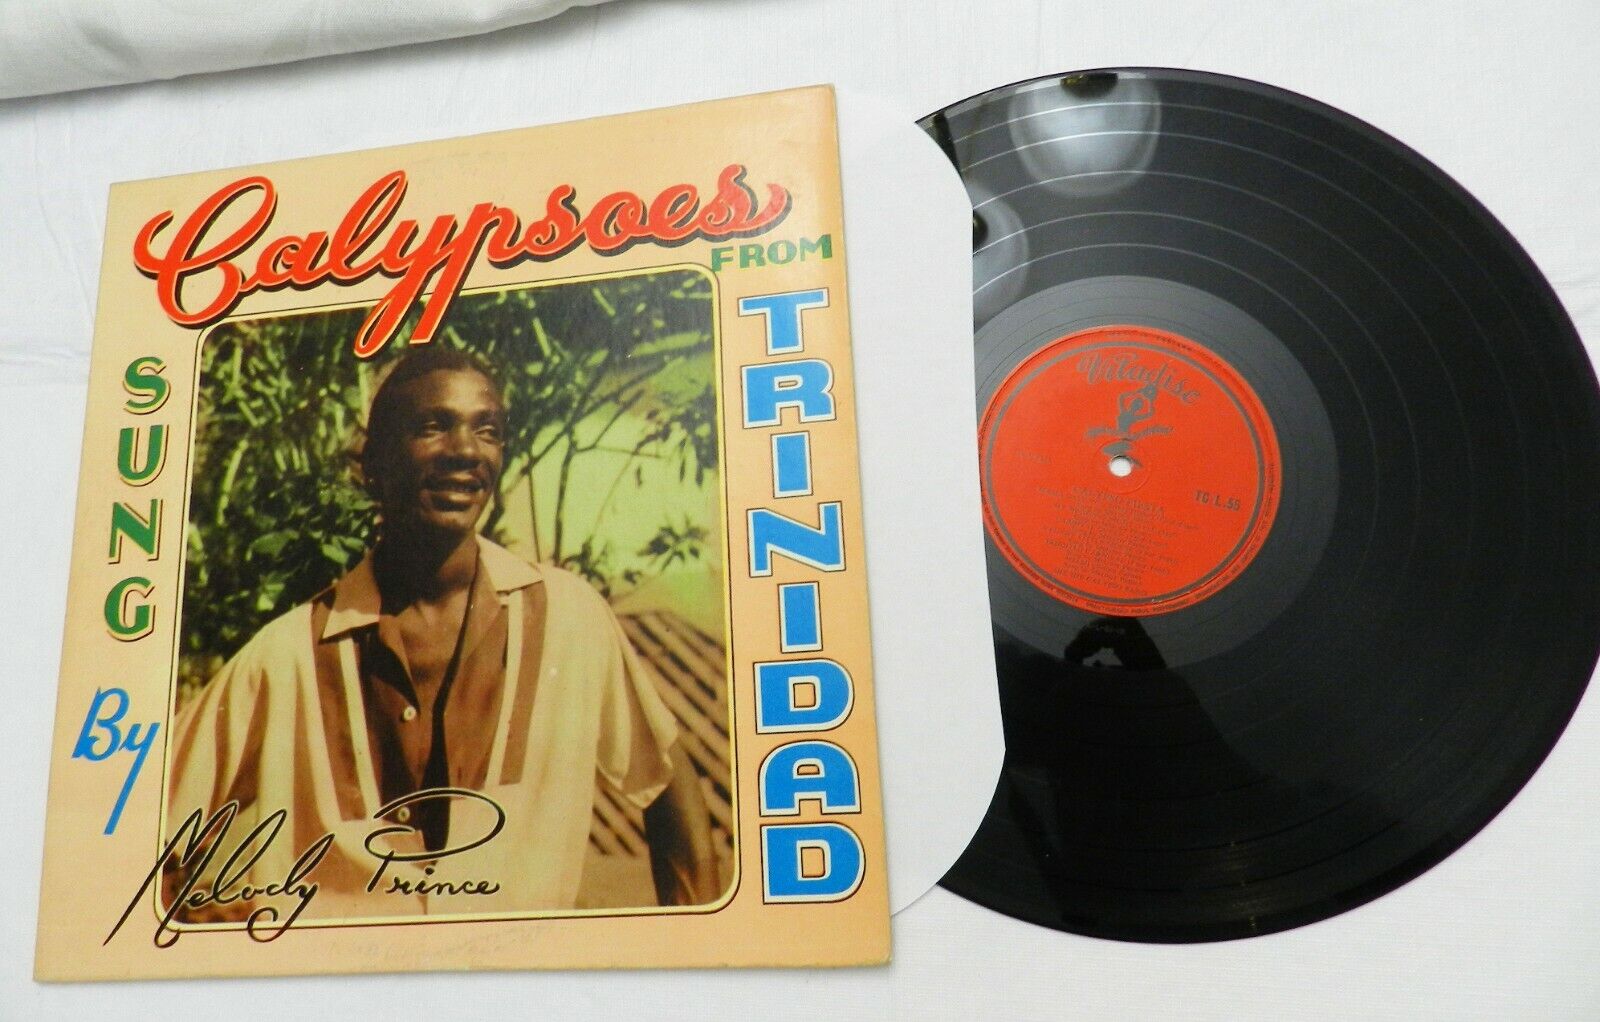 LP, Melody Prince, Calypsoes from Trinidad Sung by Melody Prince, 1957, VG+ 